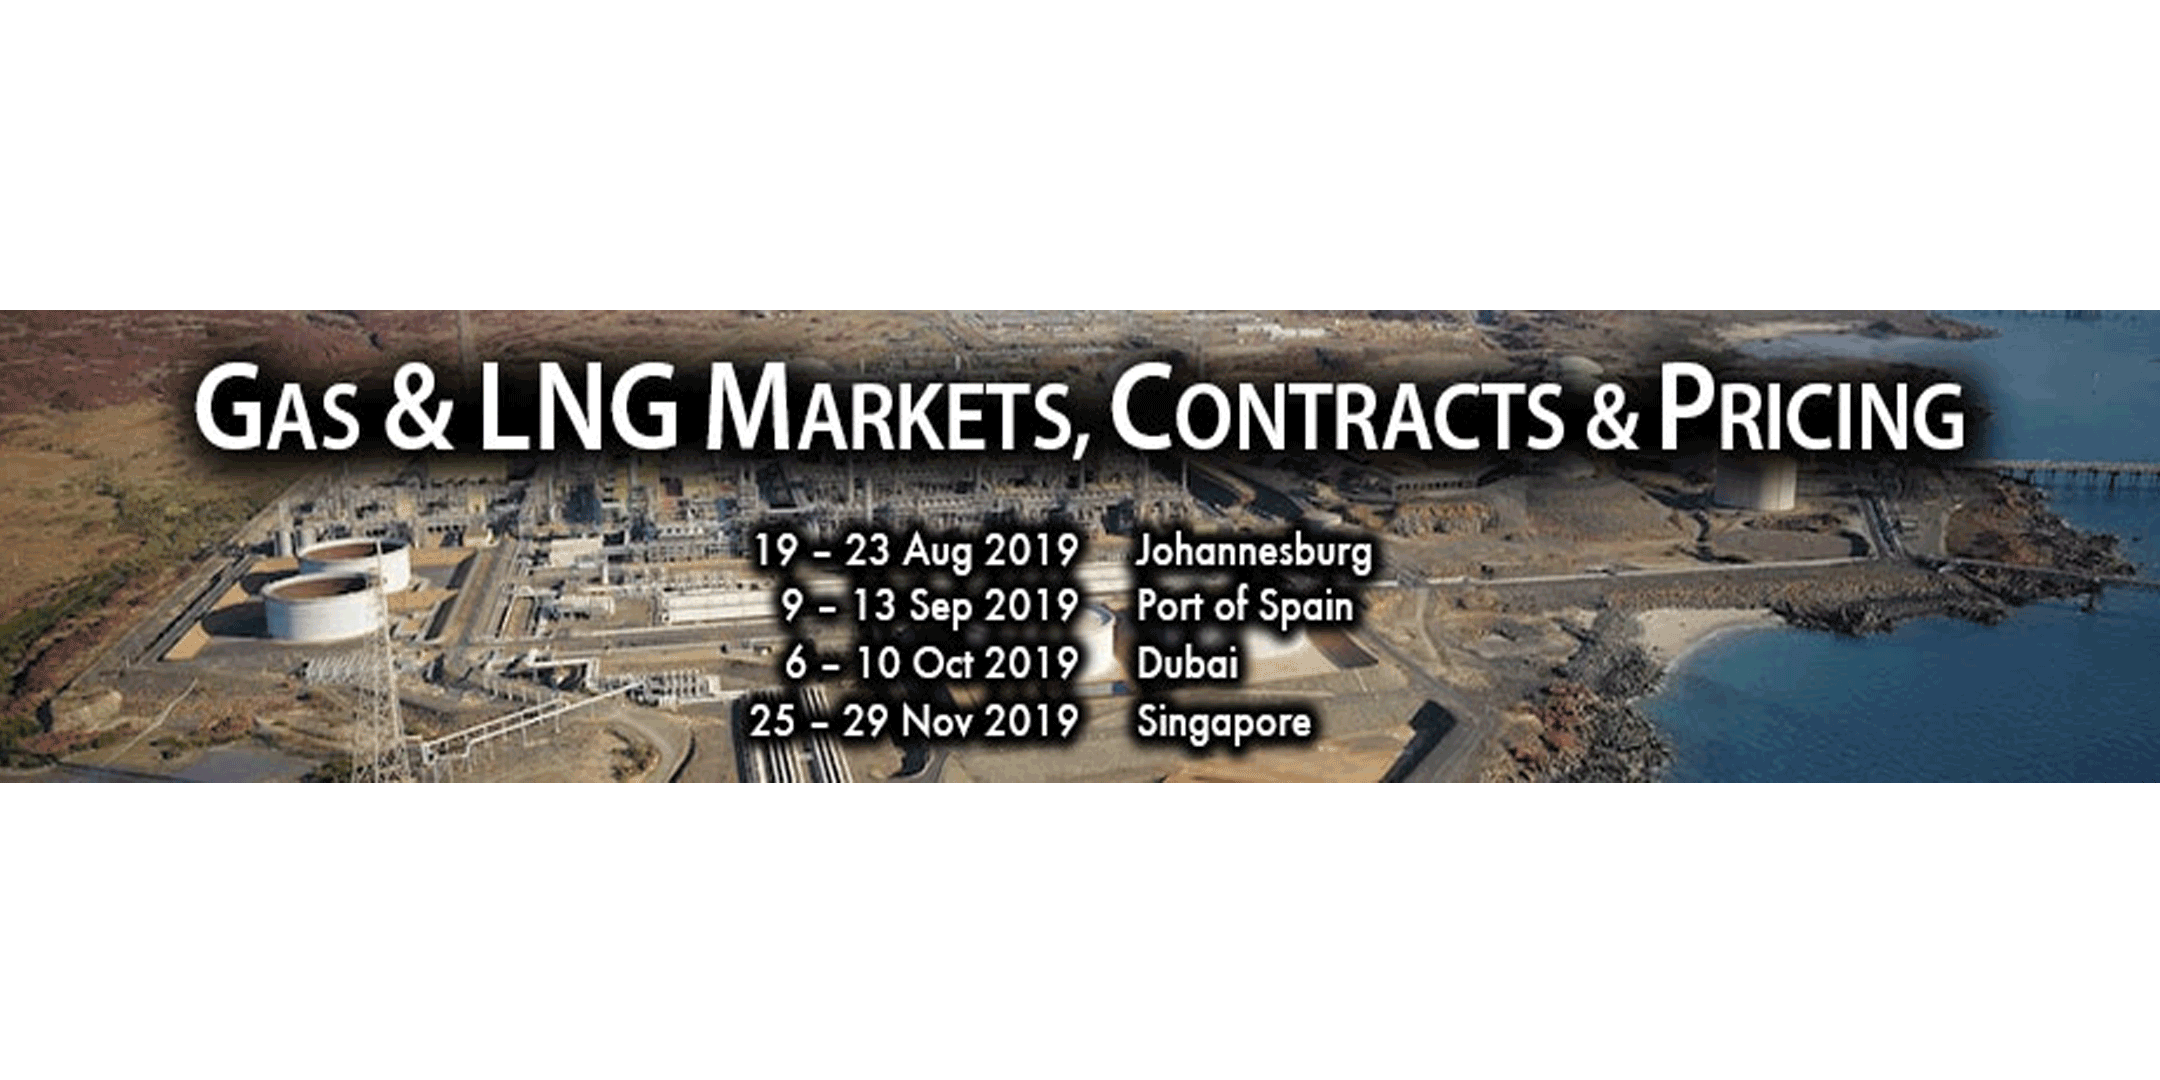 Gas & LNG Markets, Contracts & Pricing - Singapore, Singapore